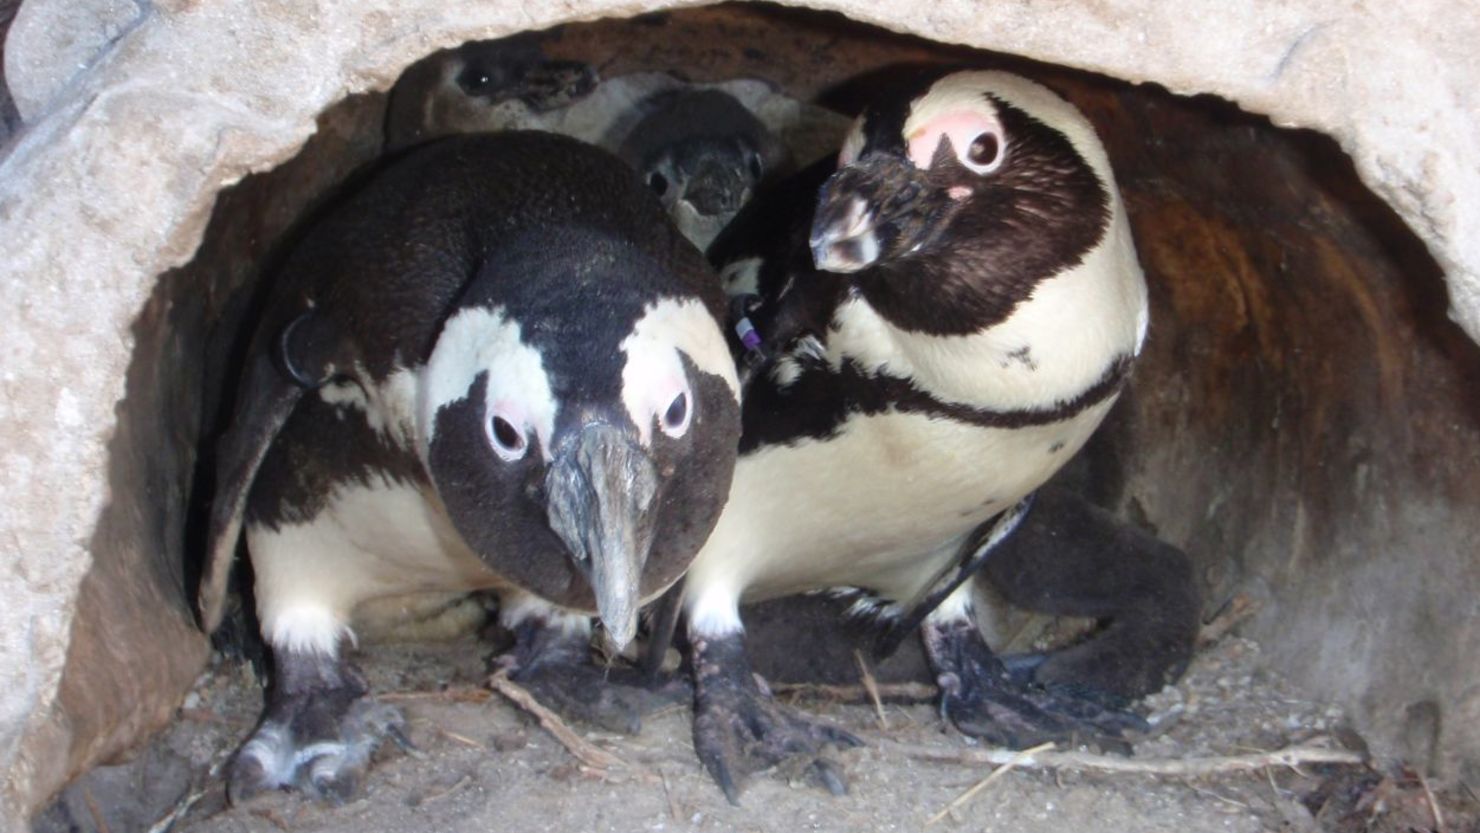 Buddy is one of many penguins who are born in captivity and cannot survive the conditions of the wild.